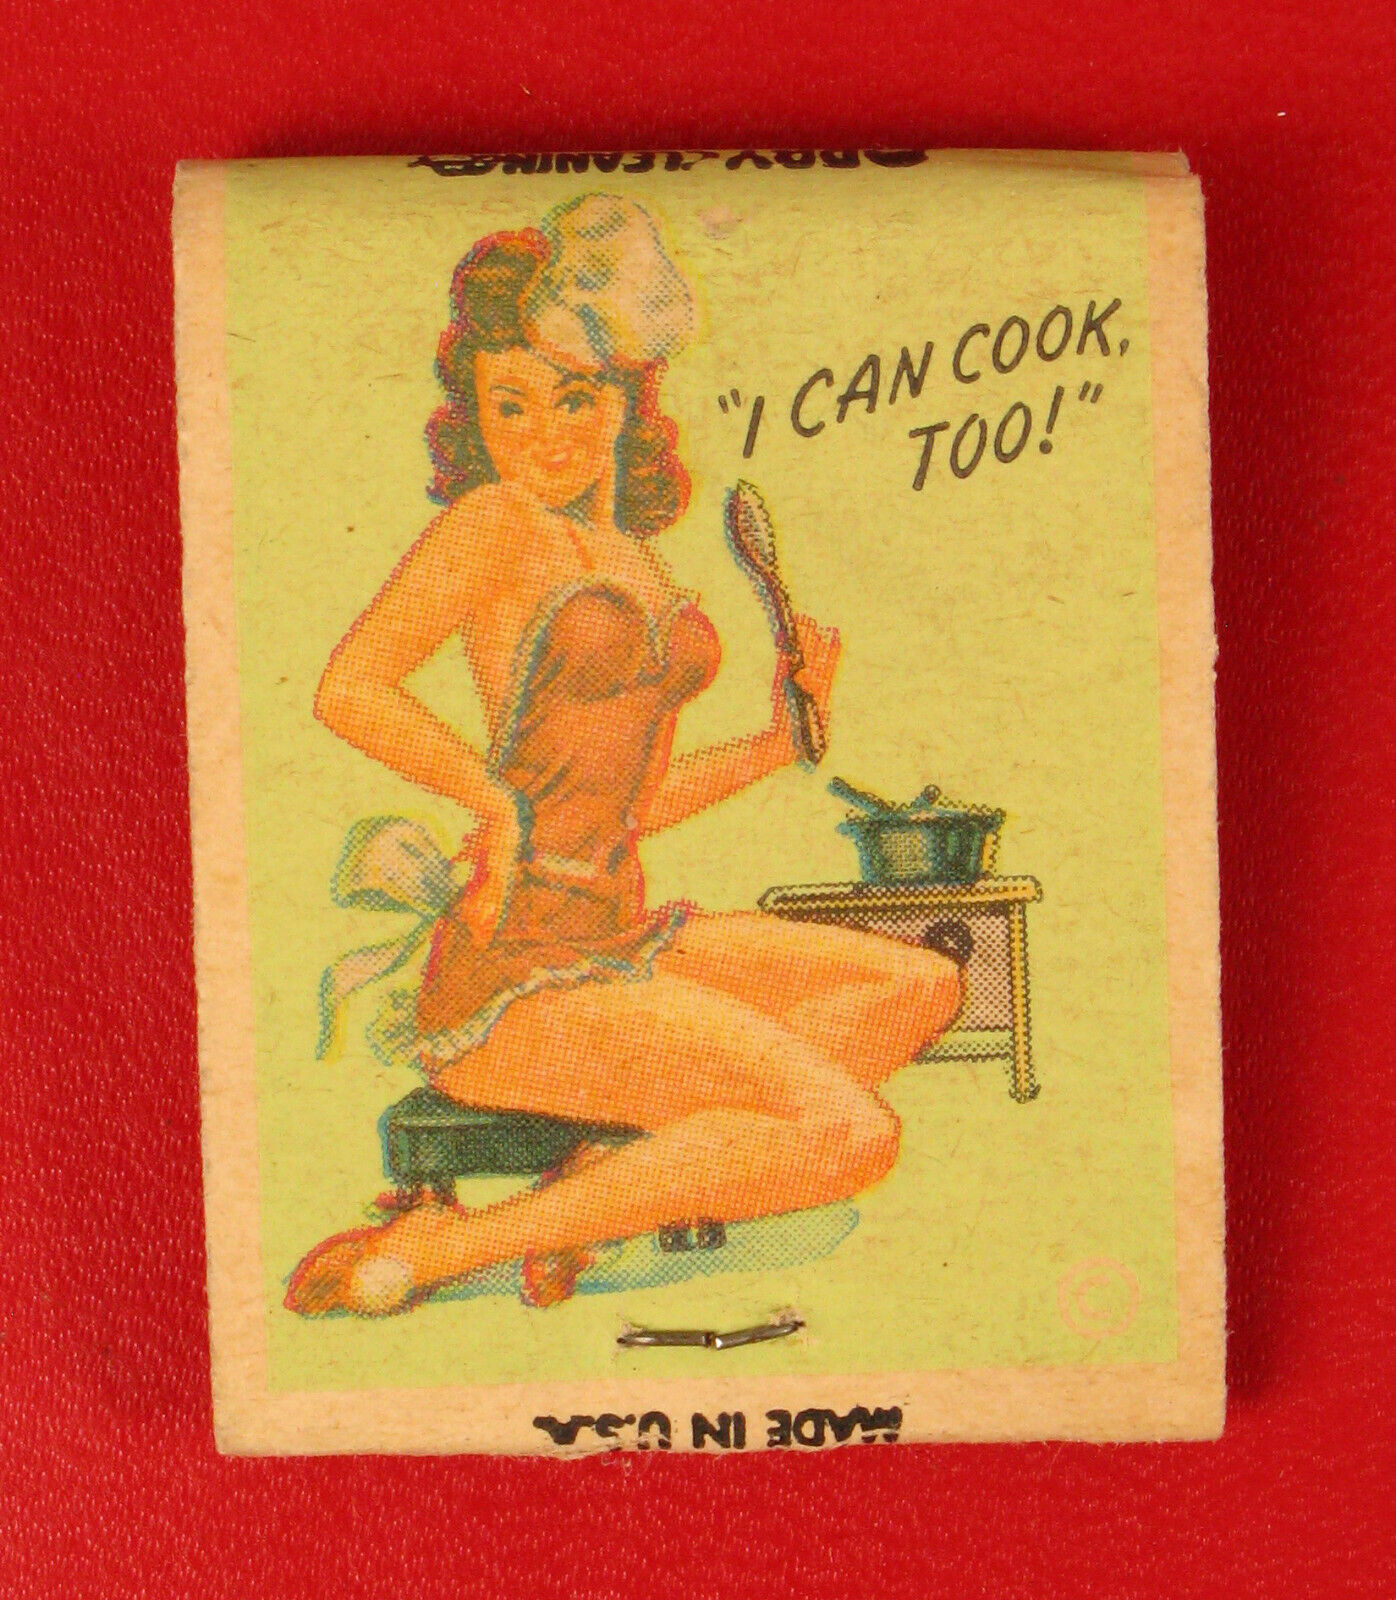 VINTAGE GRANDE TAILORS PROVIDENCE RI I CAN COOK GIRLIE MATCHBOOK MATCHES RARE 